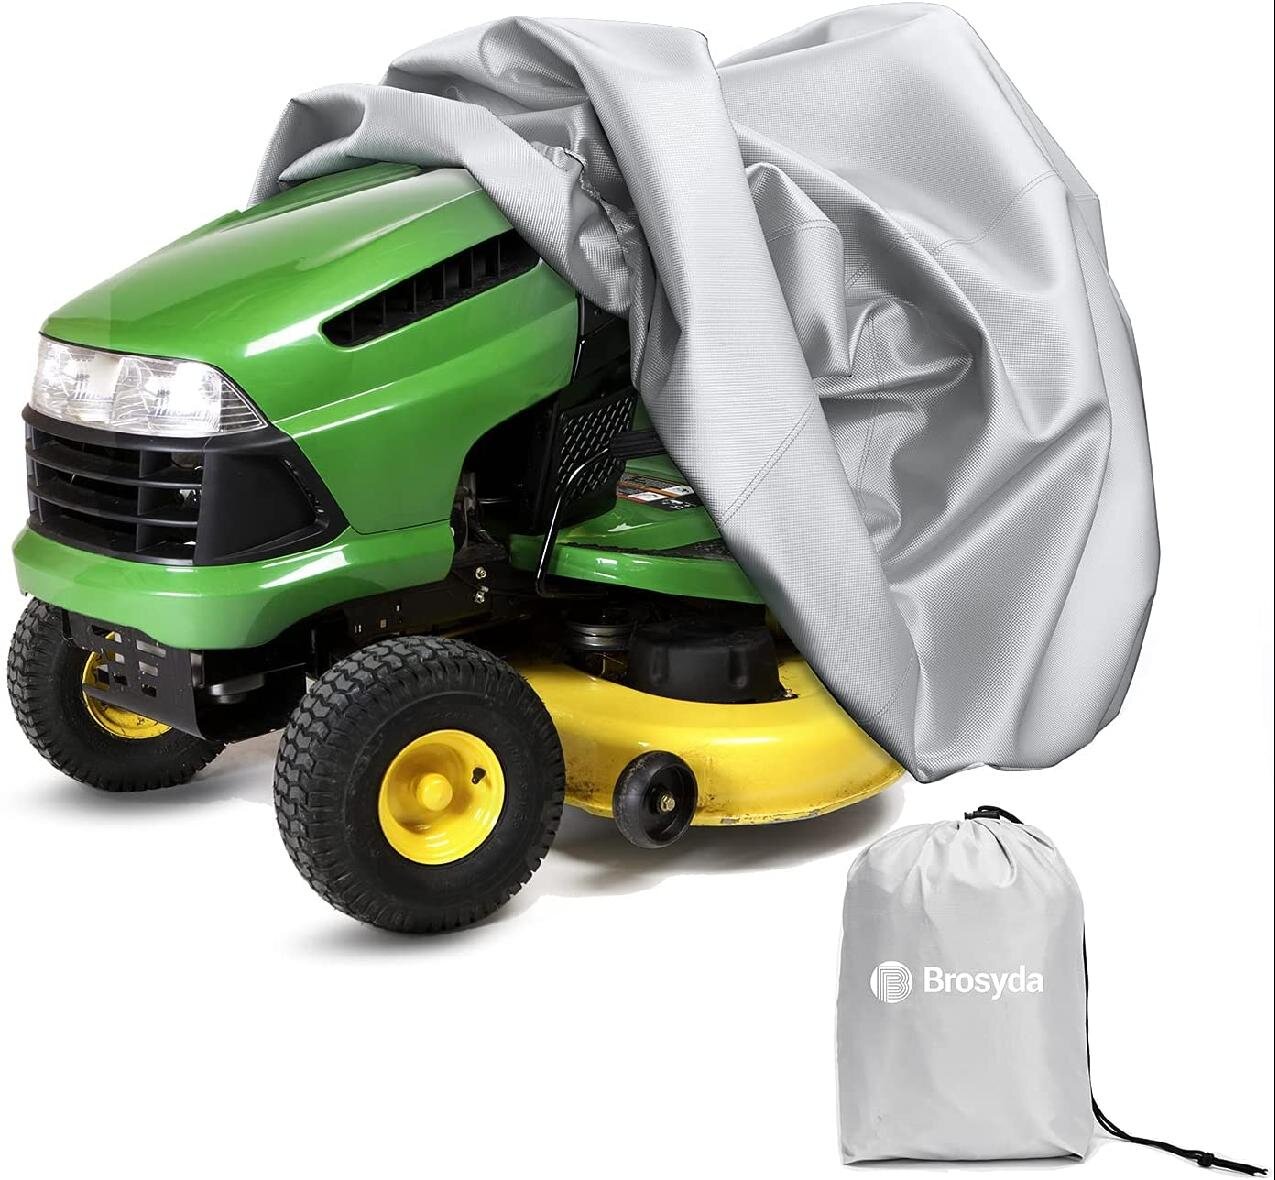 Waterproof Riding Lawn Mower Tractor Storage Cover Outdoor UV Protection